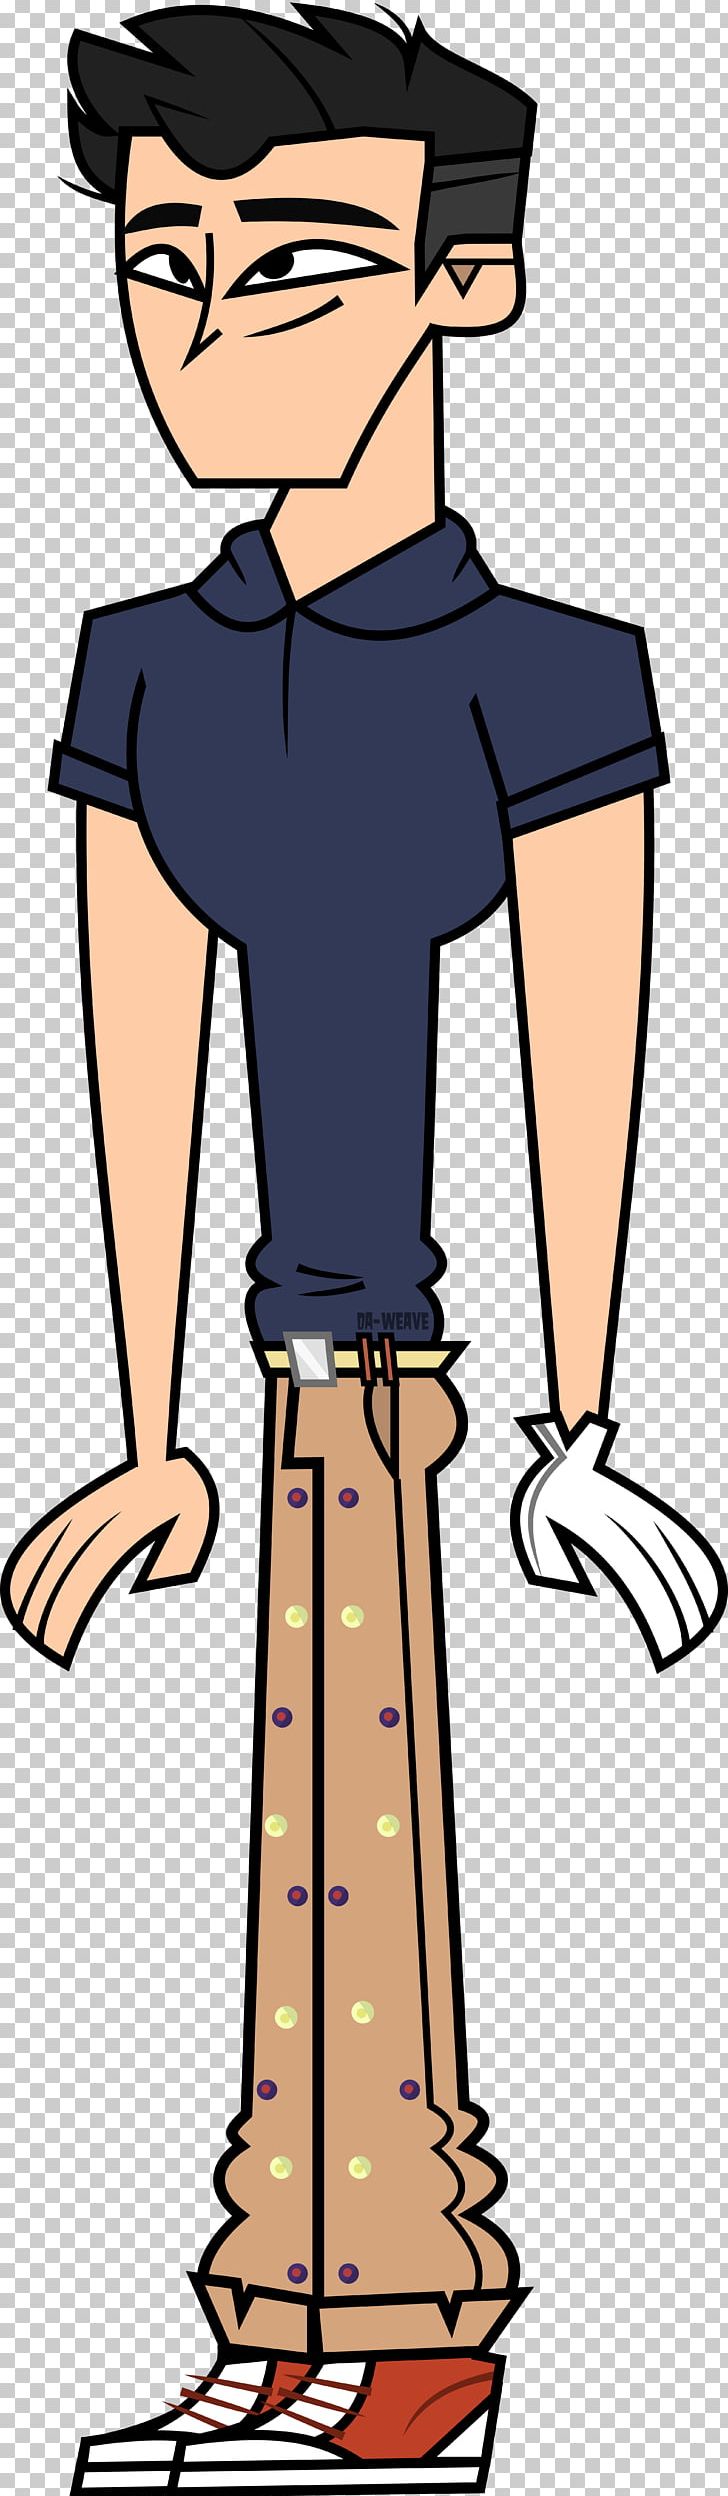 Chanel #3 Chanel #2 Total Drama Island Scream Queen PNG, Clipart, Art, Artist, Artwork, Cartoon, Chanel 2 Free PNG Download